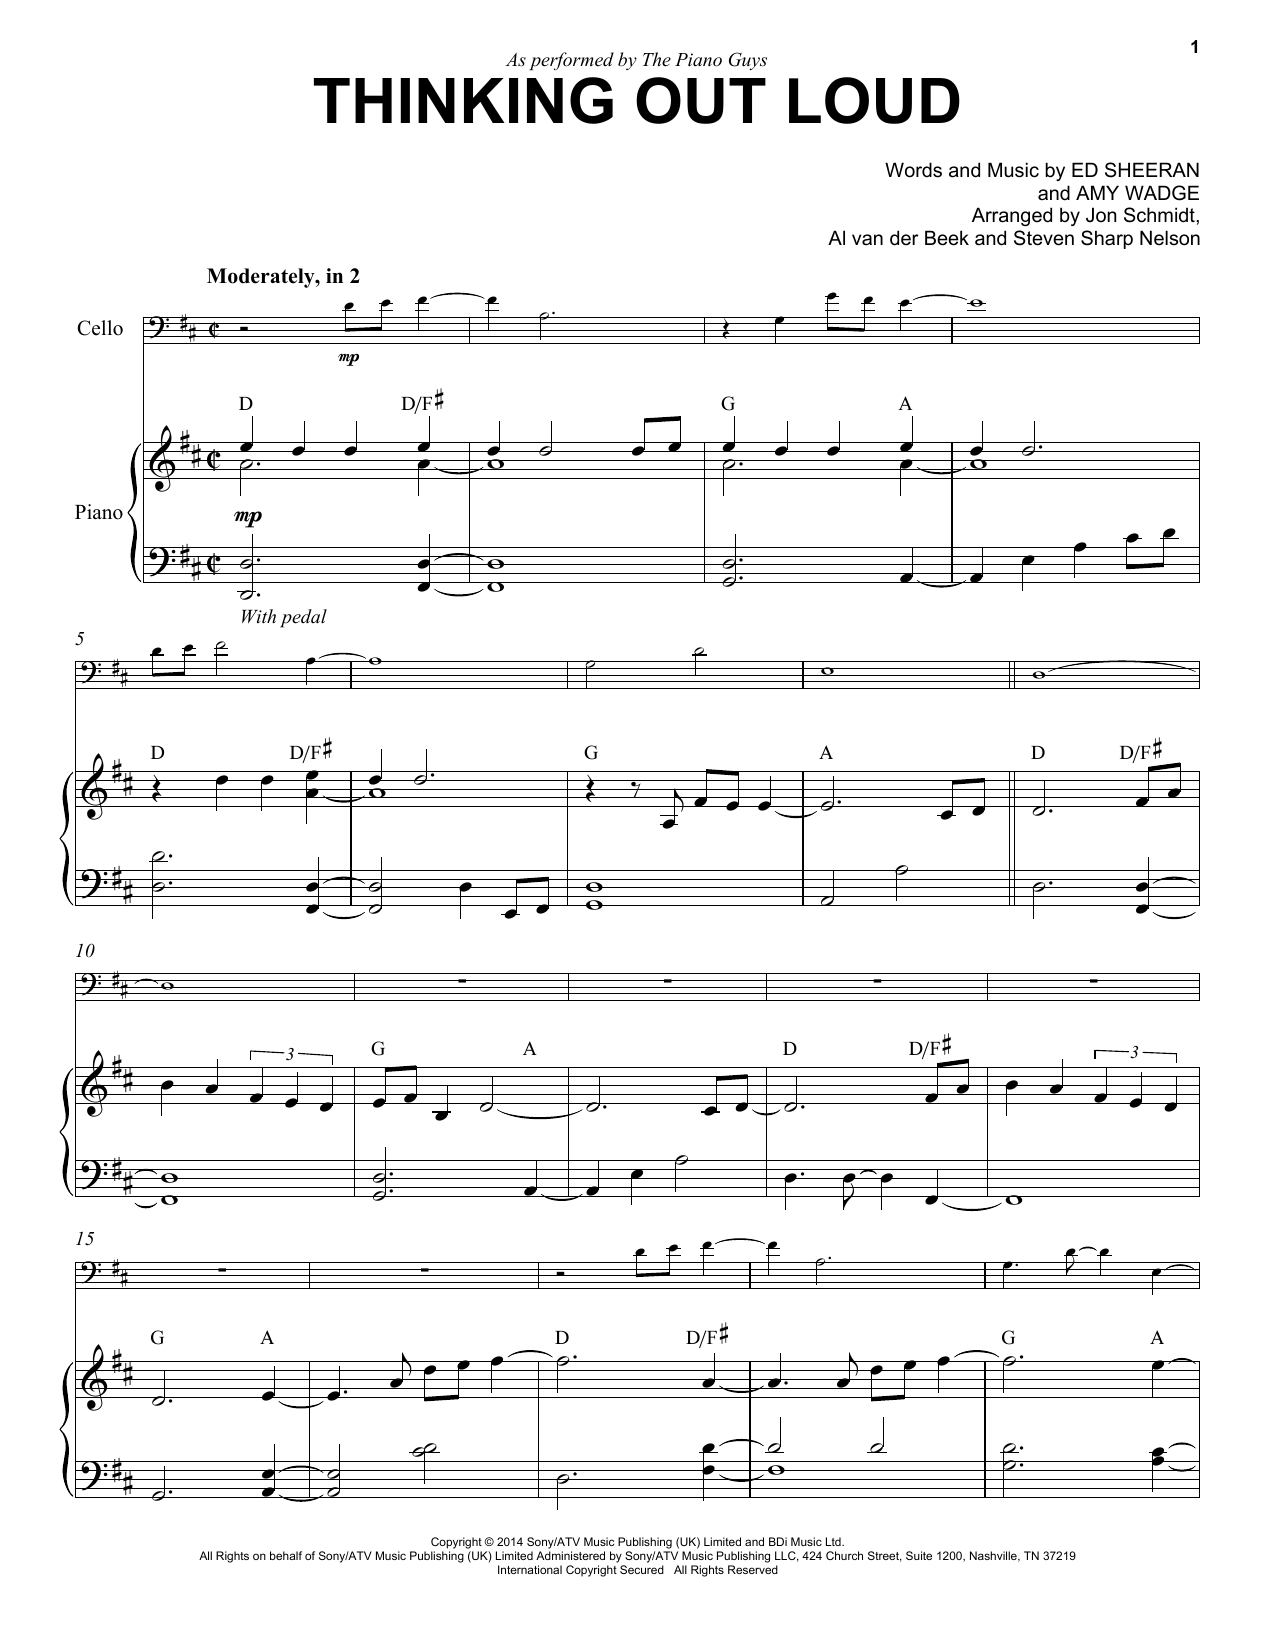 Download The Piano Guys Thinking Out Loud Sheet Music